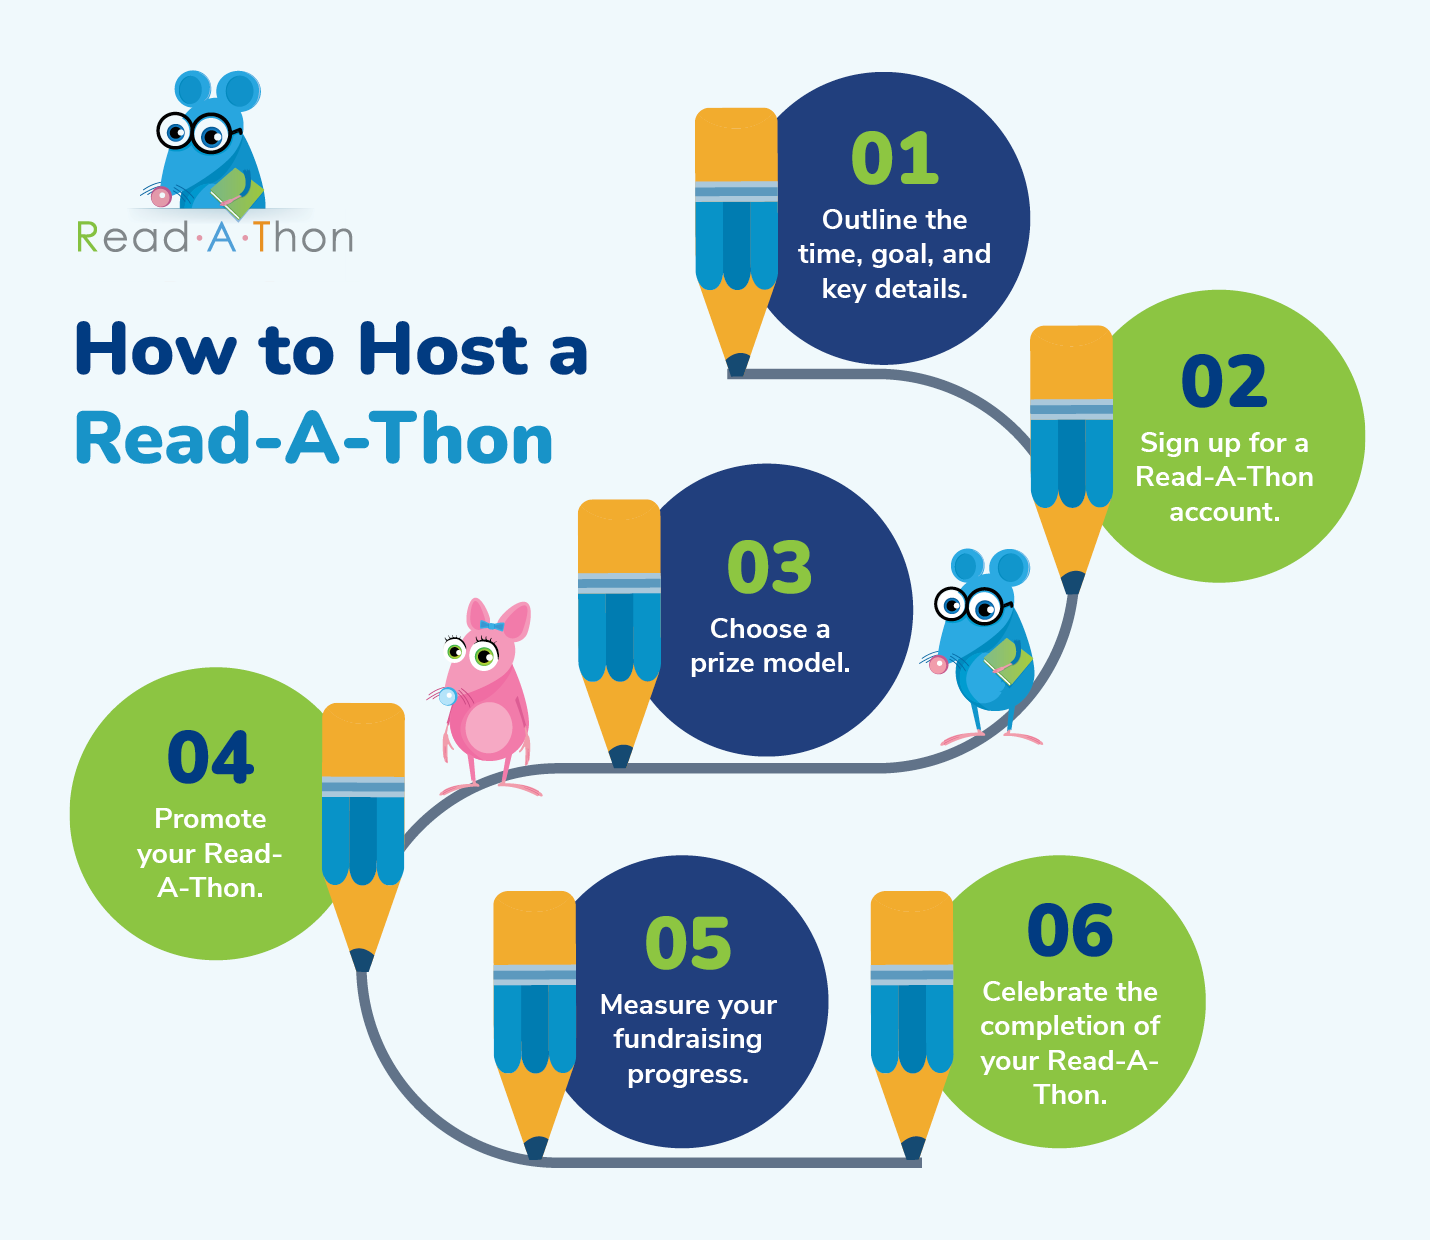 The steps for running a Read-A-Thon, as described in more detail below.